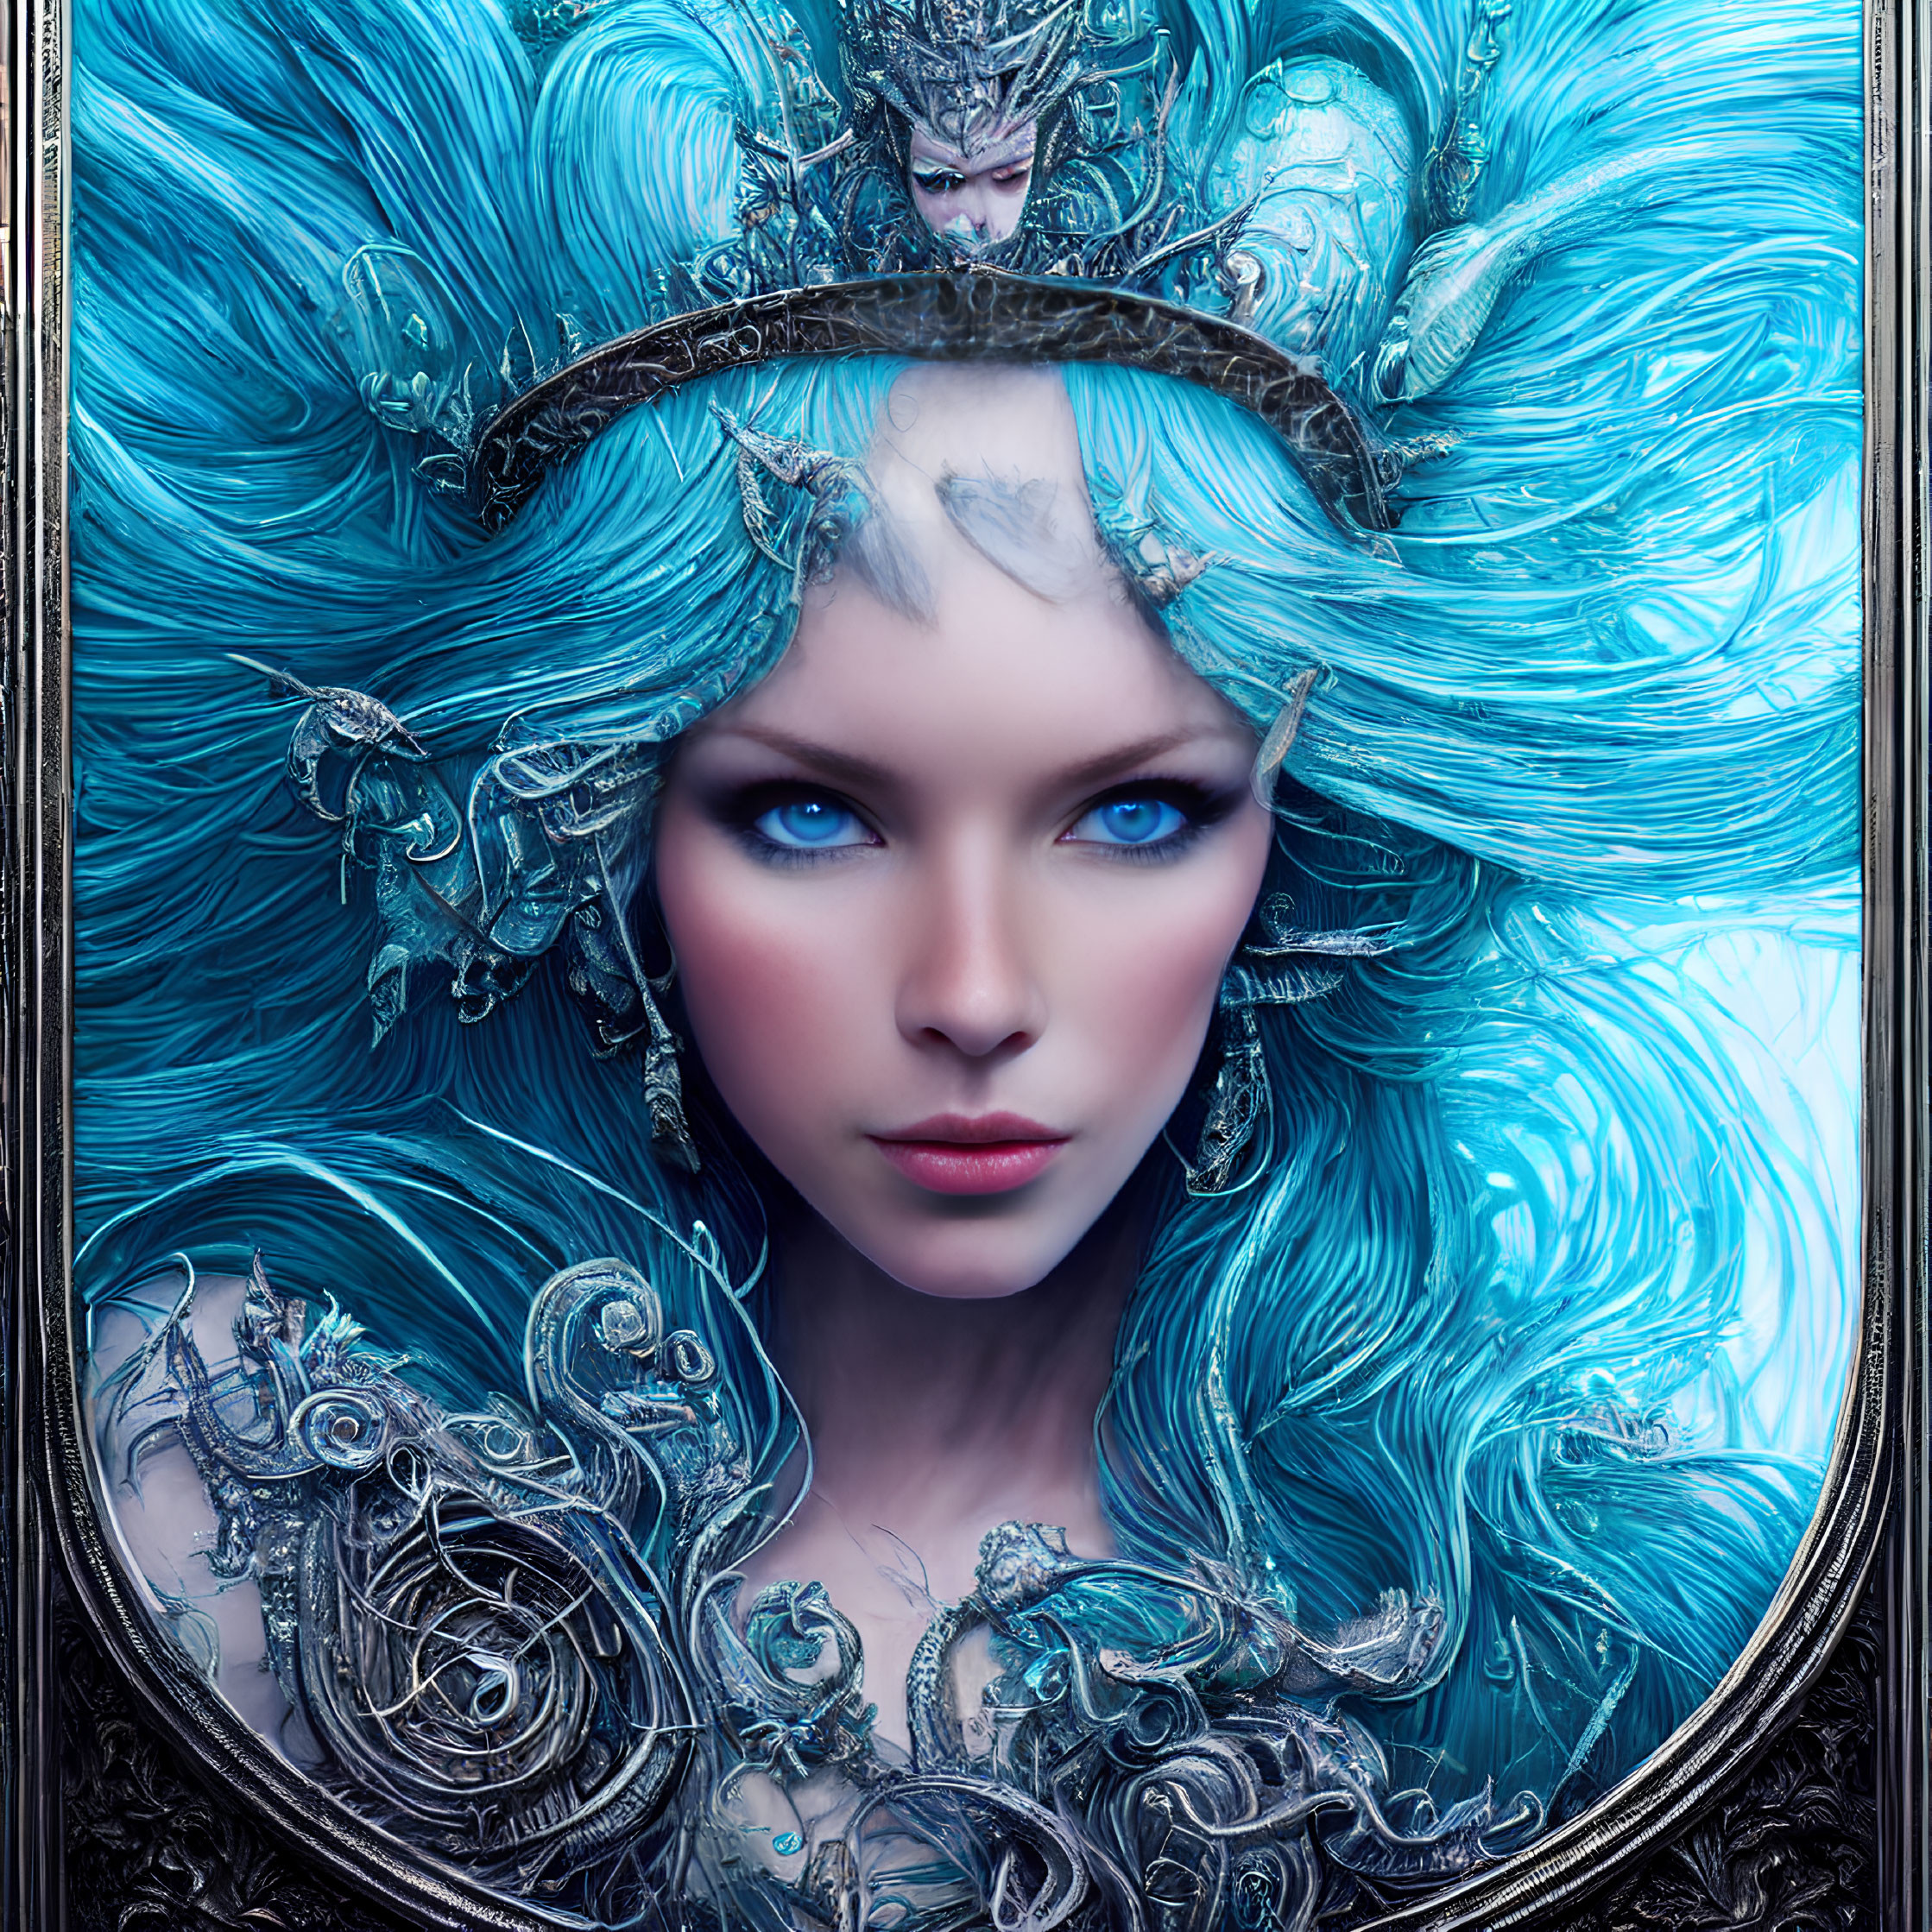 Fantasy portrait of a woman with blue hair and ornate headpiece on blue background